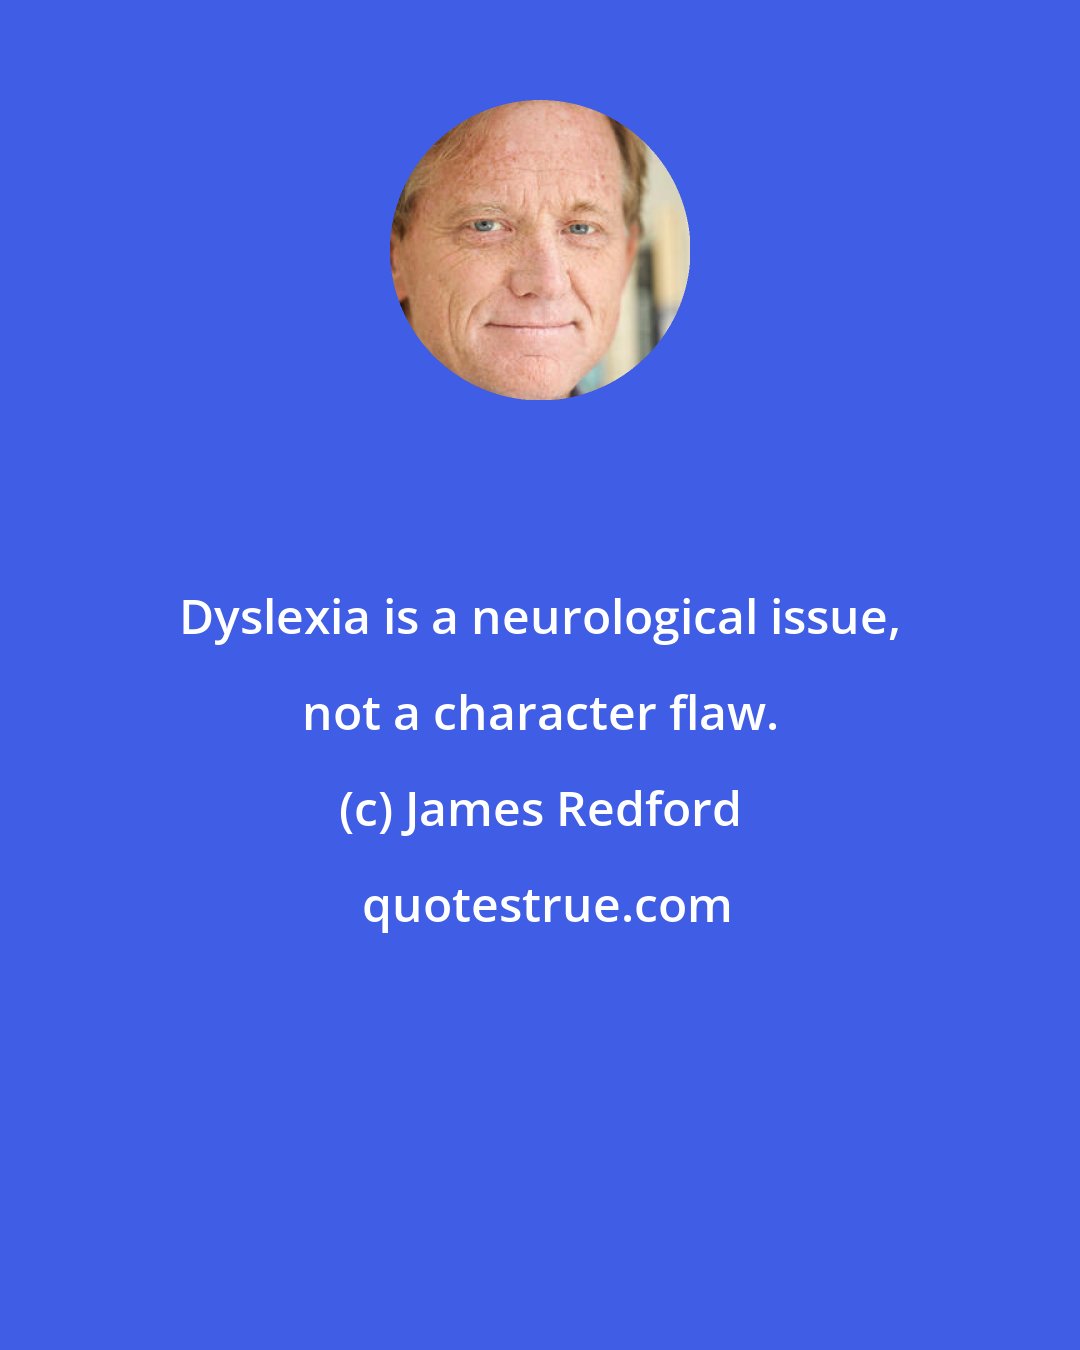 James Redford: Dyslexia is a neurological issue, not a character flaw.